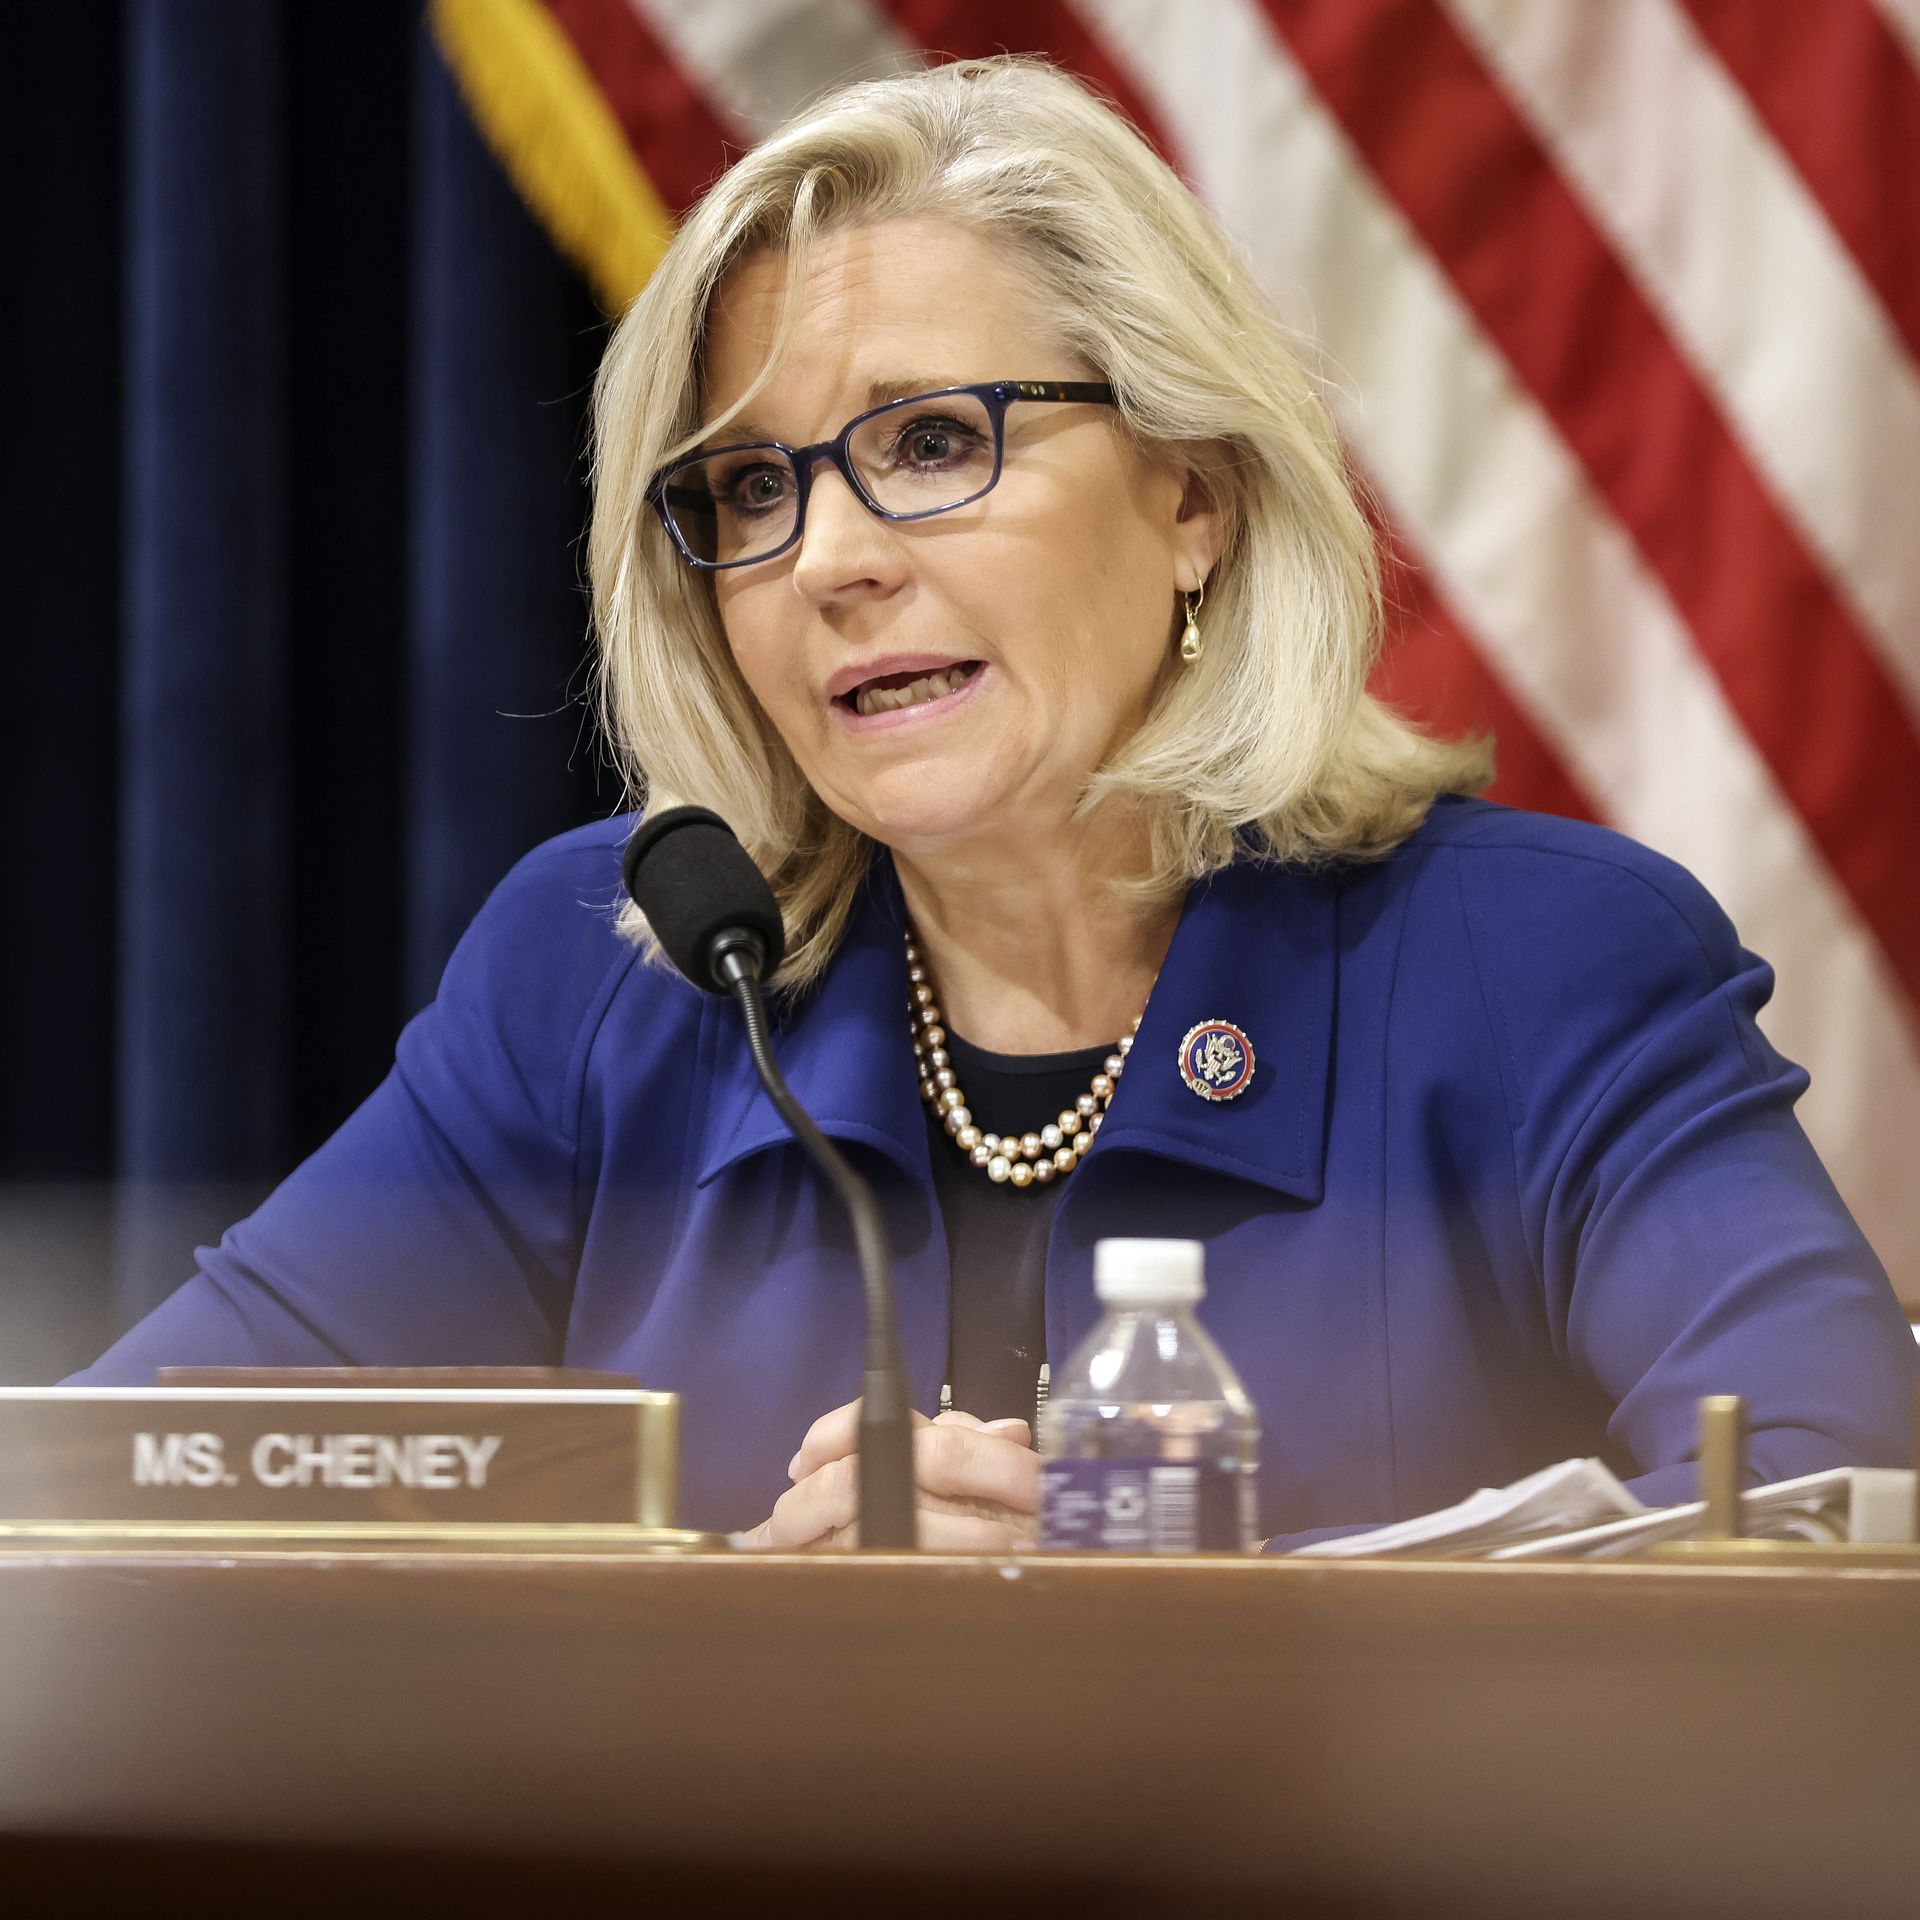 Rep. Liz Cheney (R-Wyo.) in a blue blazer sits at a table, behind a microphone and a placard of her name, and in front of an American flag.